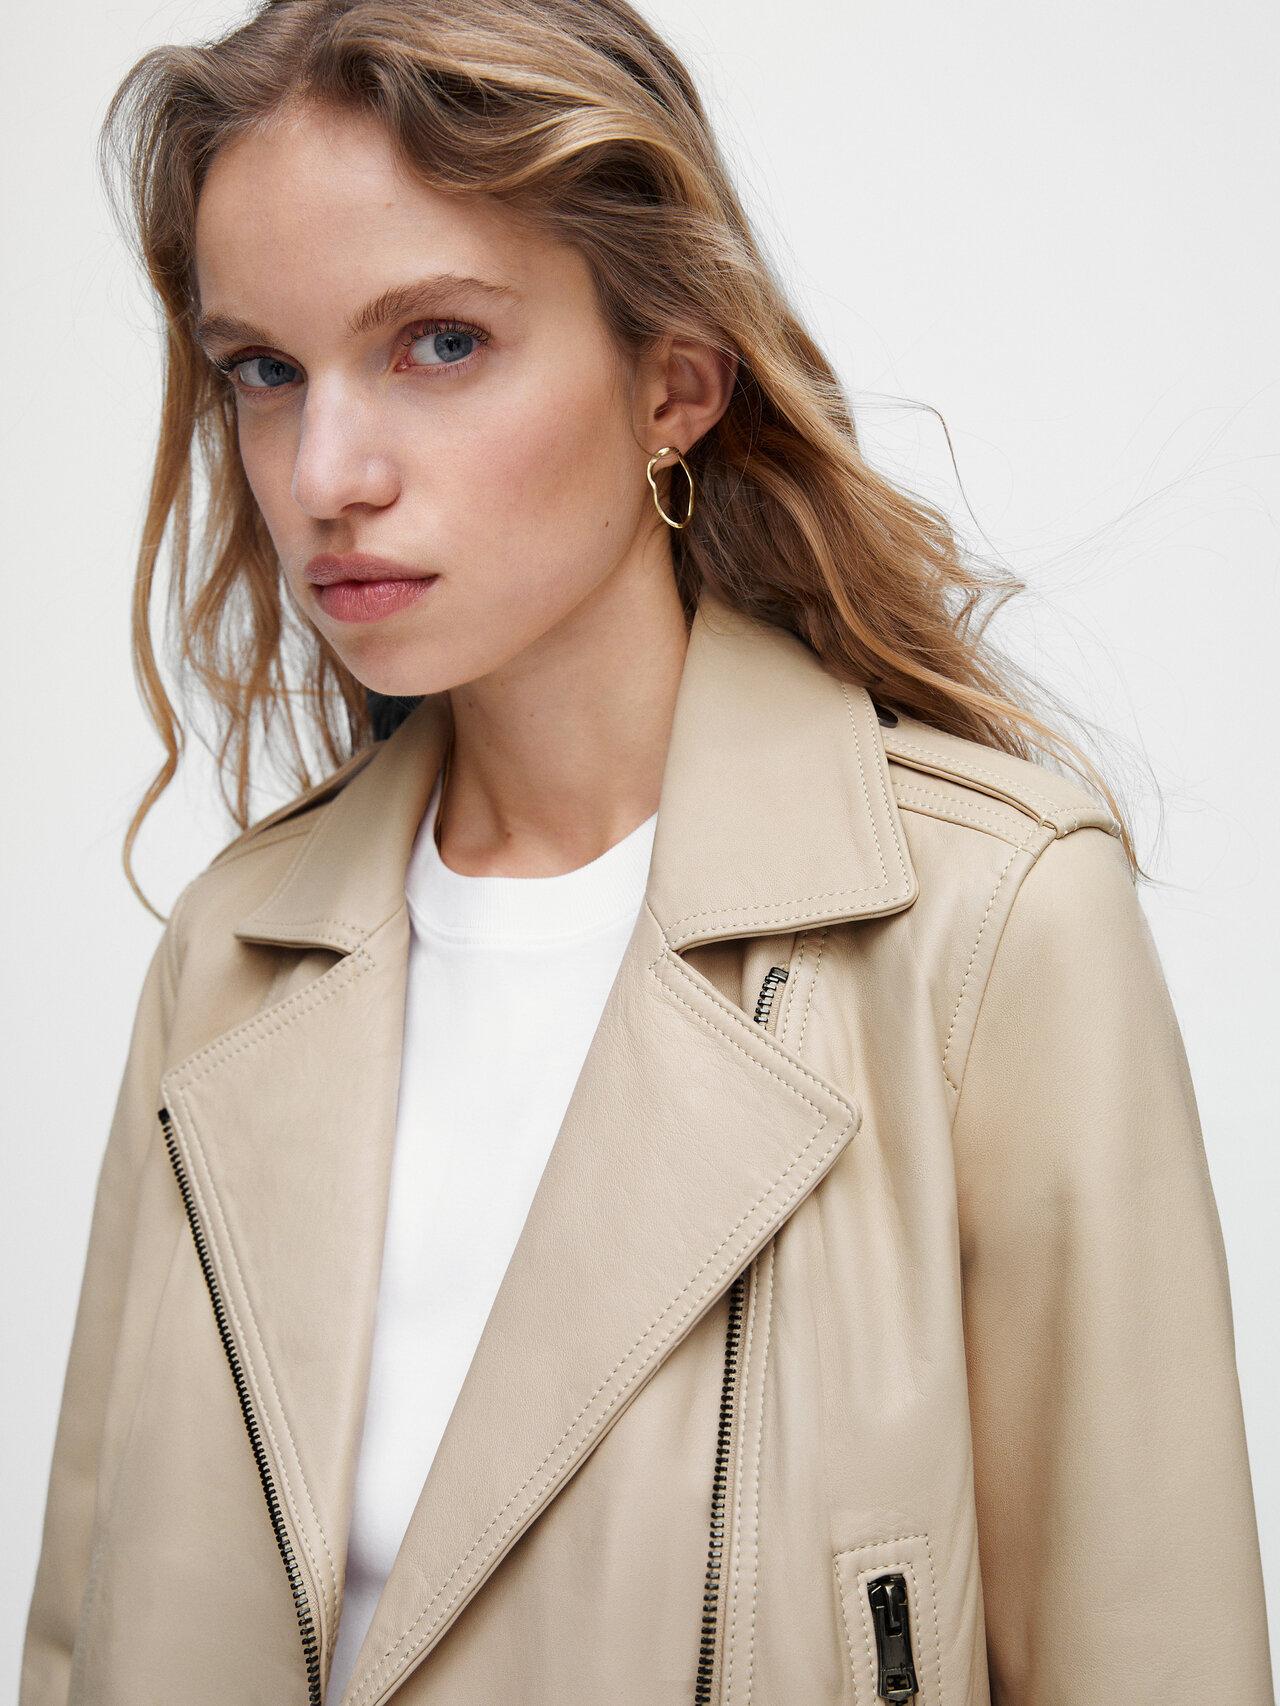 MASSIMO DUTTI Nappa Leather Biker Jacket in Natural | Lyst